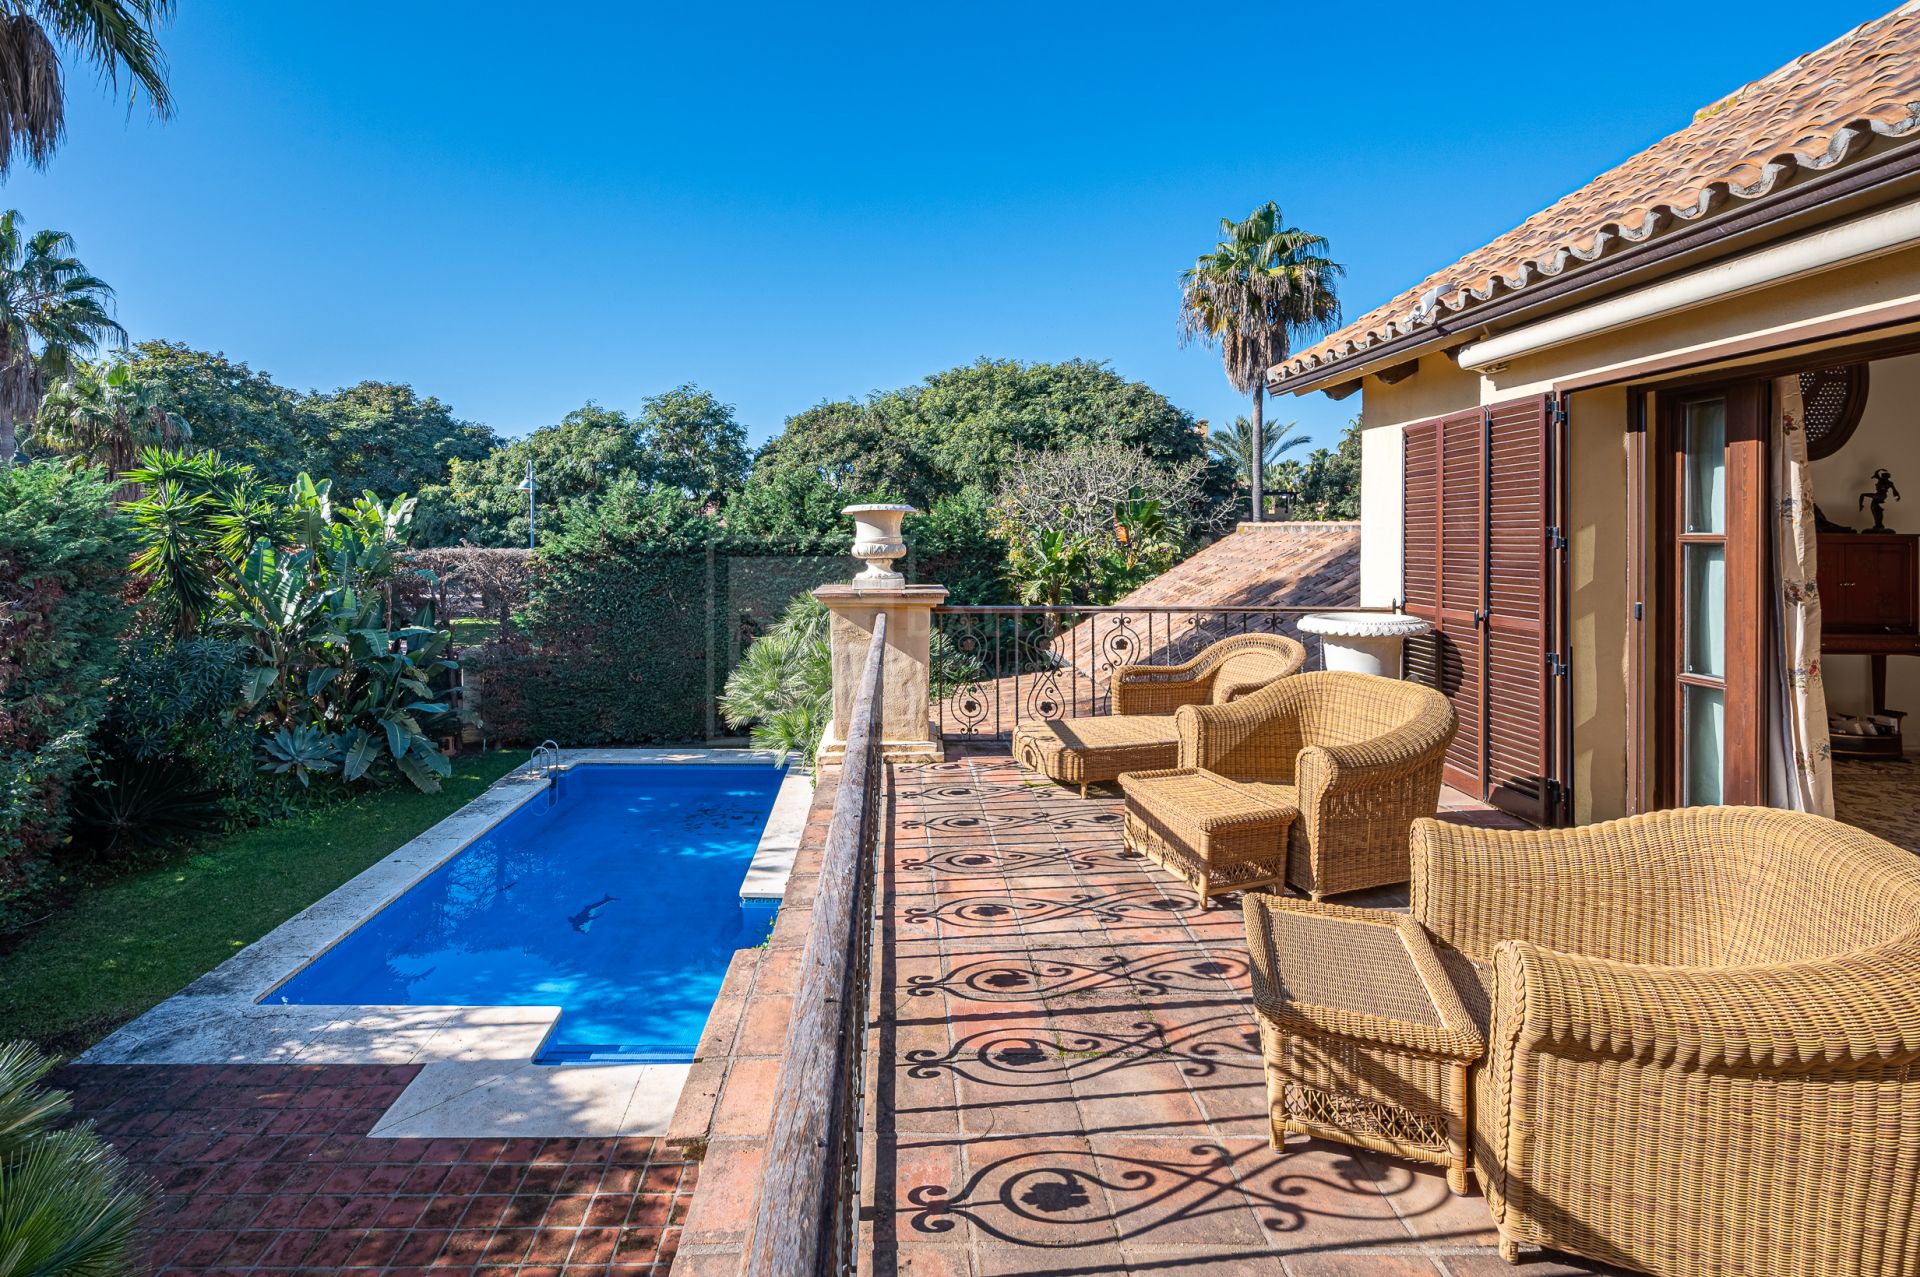 AN ABSOLUTE FIND: CLASSIC 4-BEDROOM ANDALUSIAN STYLE VILLA IN PUERTO BANUS, MARBELLA